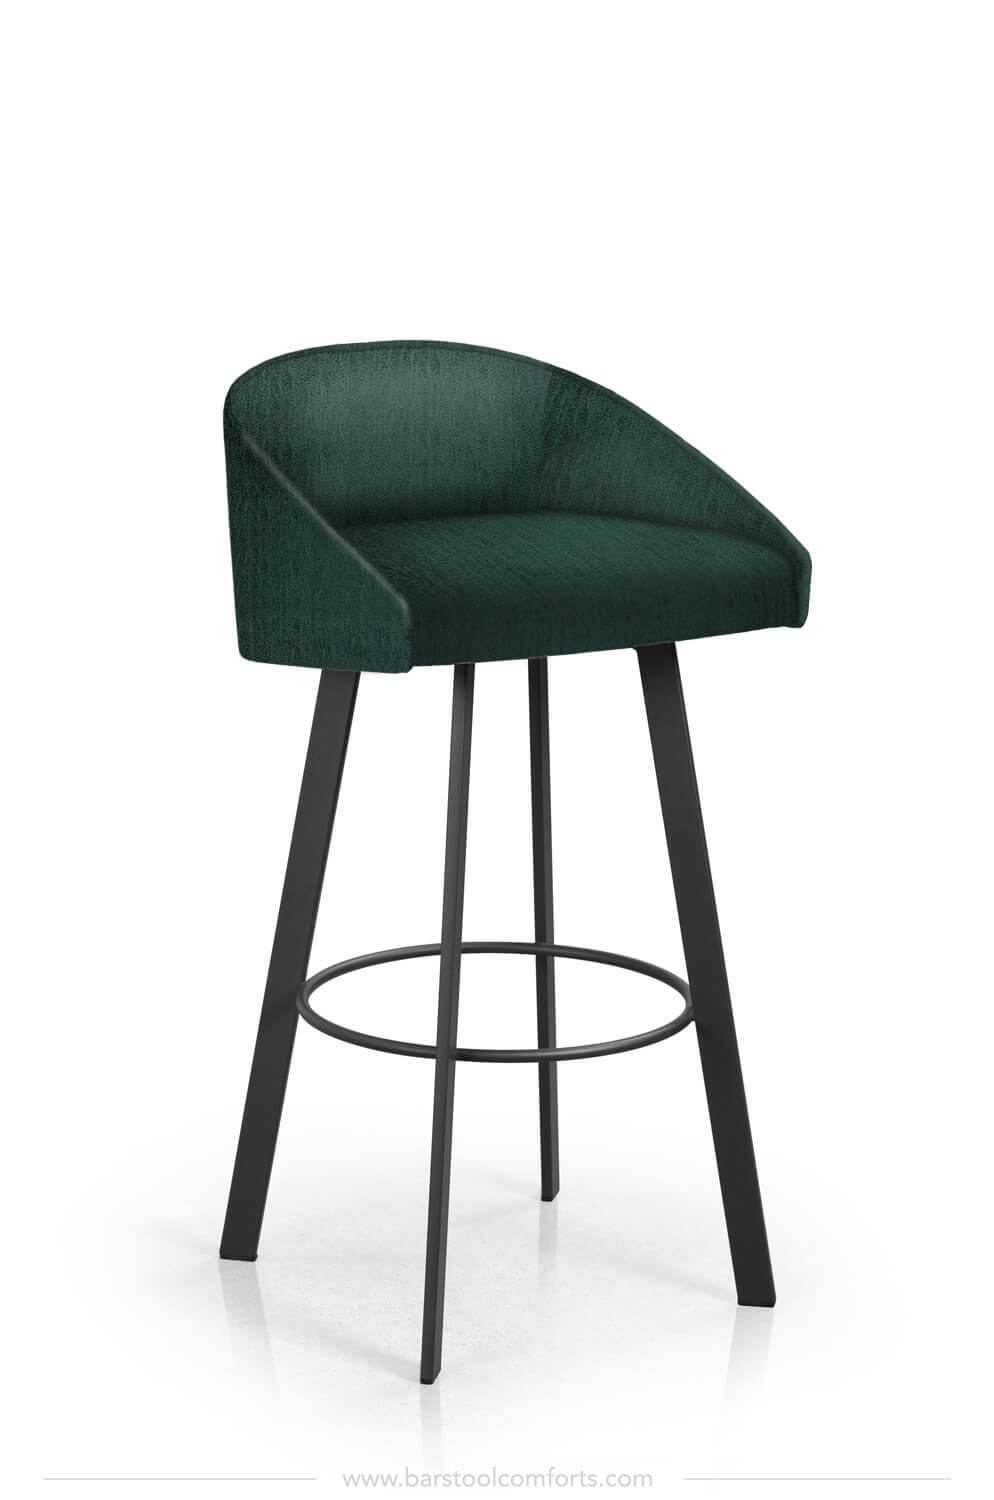 Trica S Liv Swivel Bar Stool With, 30 Bar Stools With Back